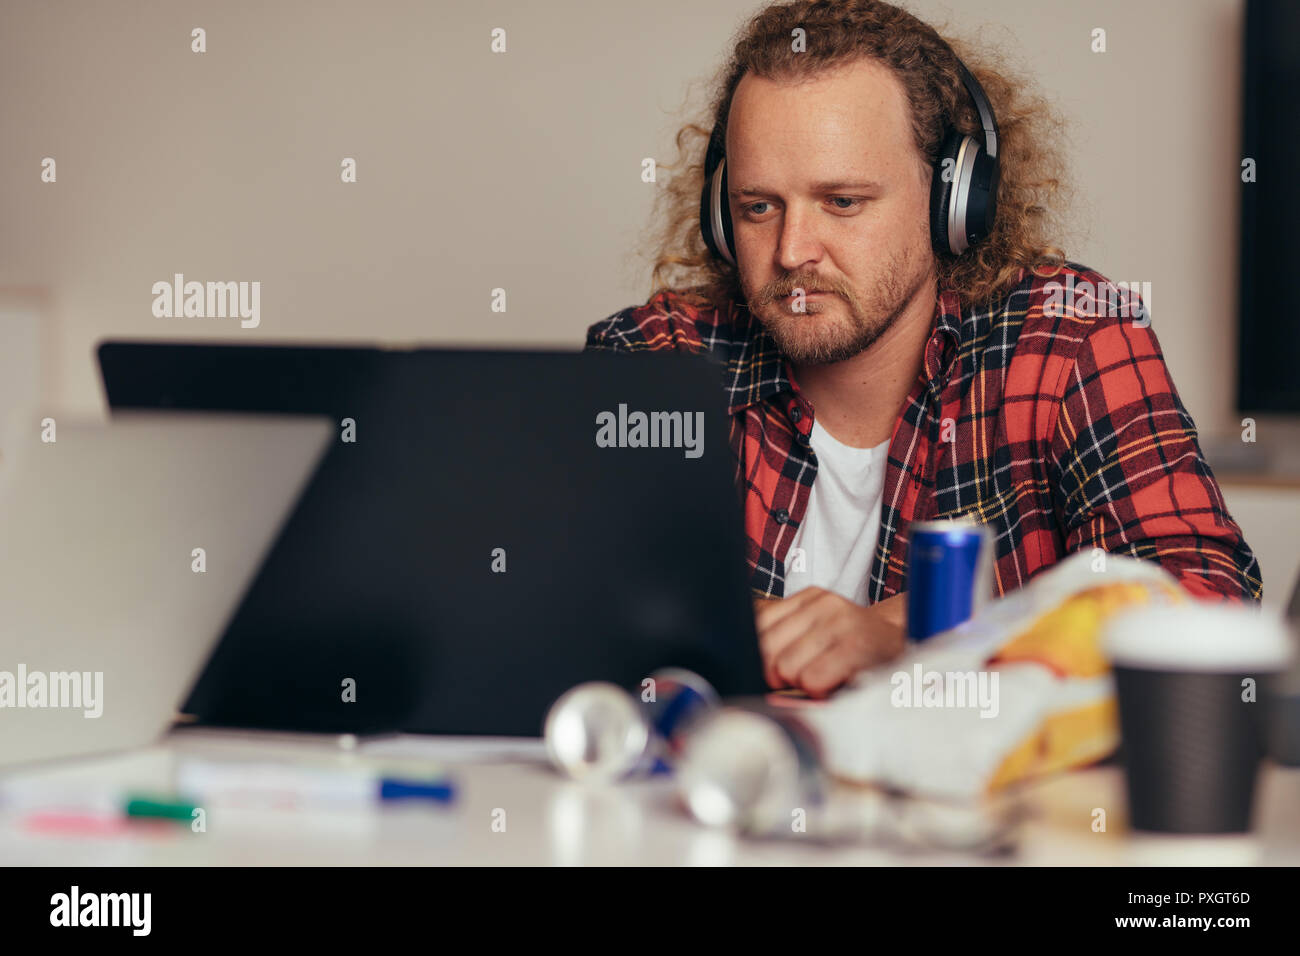 Man busy coding on laptop. Male computer programmer wearing headphones working on laptop at tech startup. Stock Photo